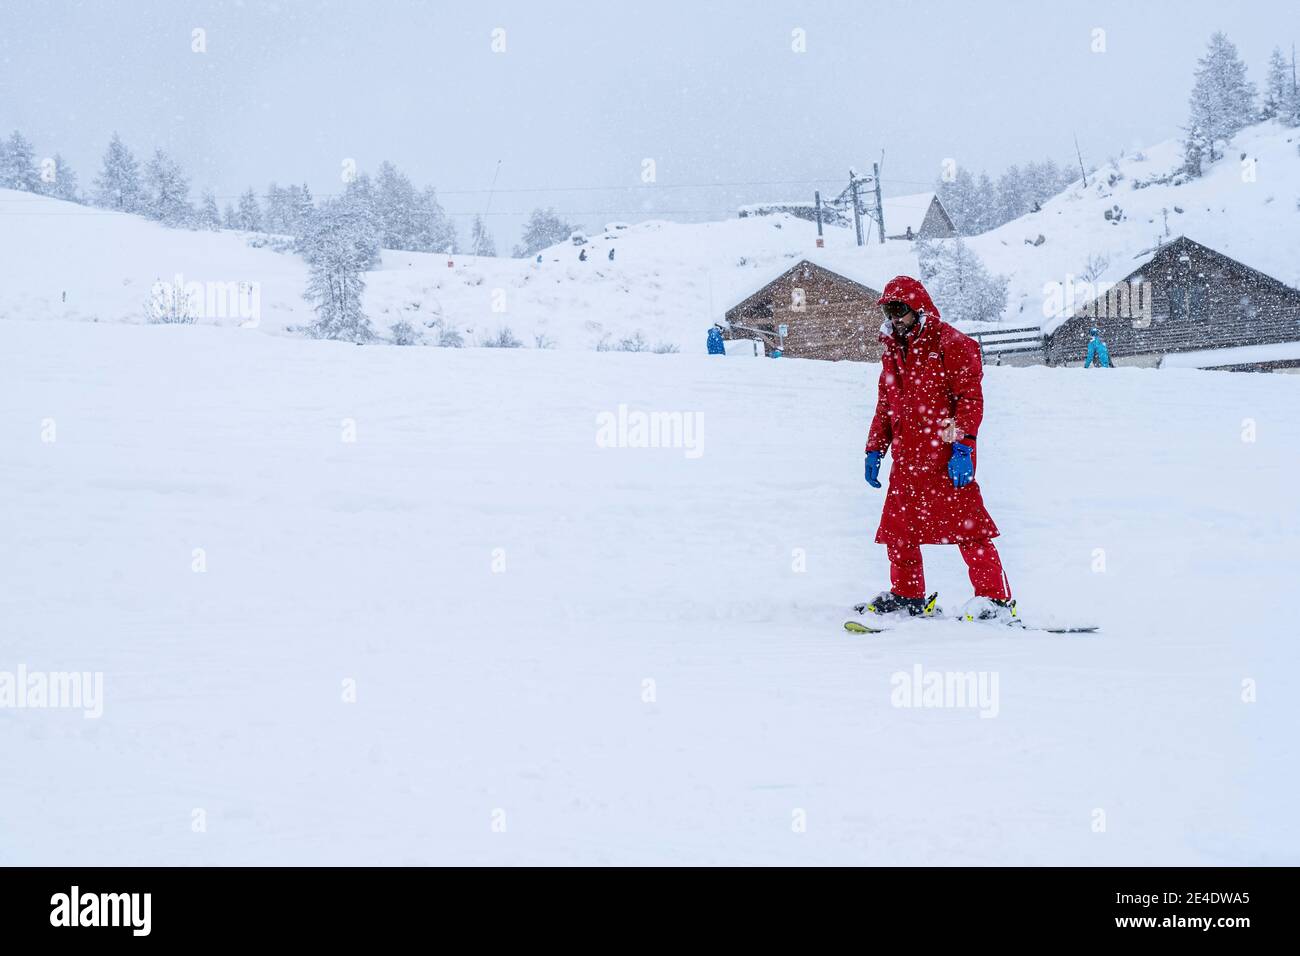 Auron, France - 01.01.2021: Professional ski instructor skiing on the ski track during snowfall. Blurred focus background. Stock Photo